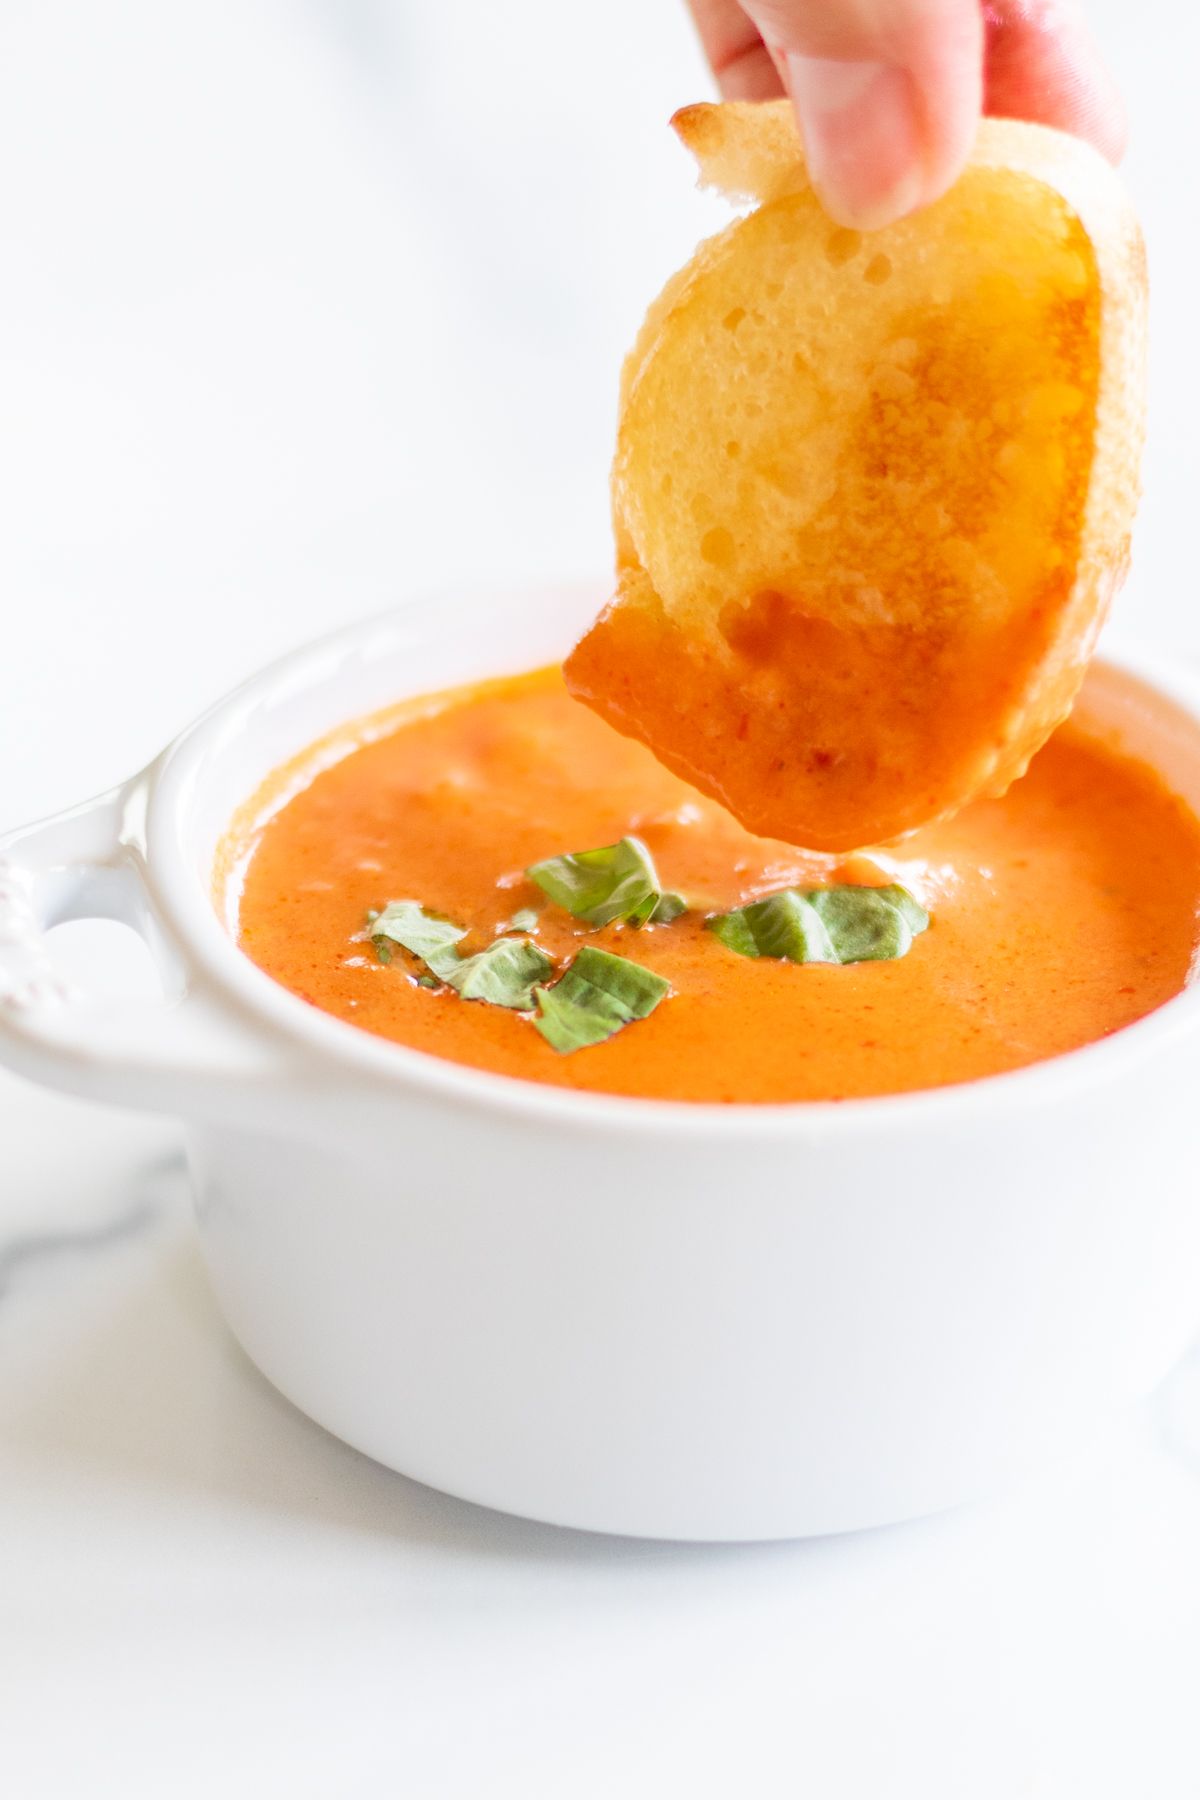 A white bowl full of a creamy tomato soup recipe, garnished with fresh basil. A Small grilled cheese sandwich dunks into the corner of the bowl.